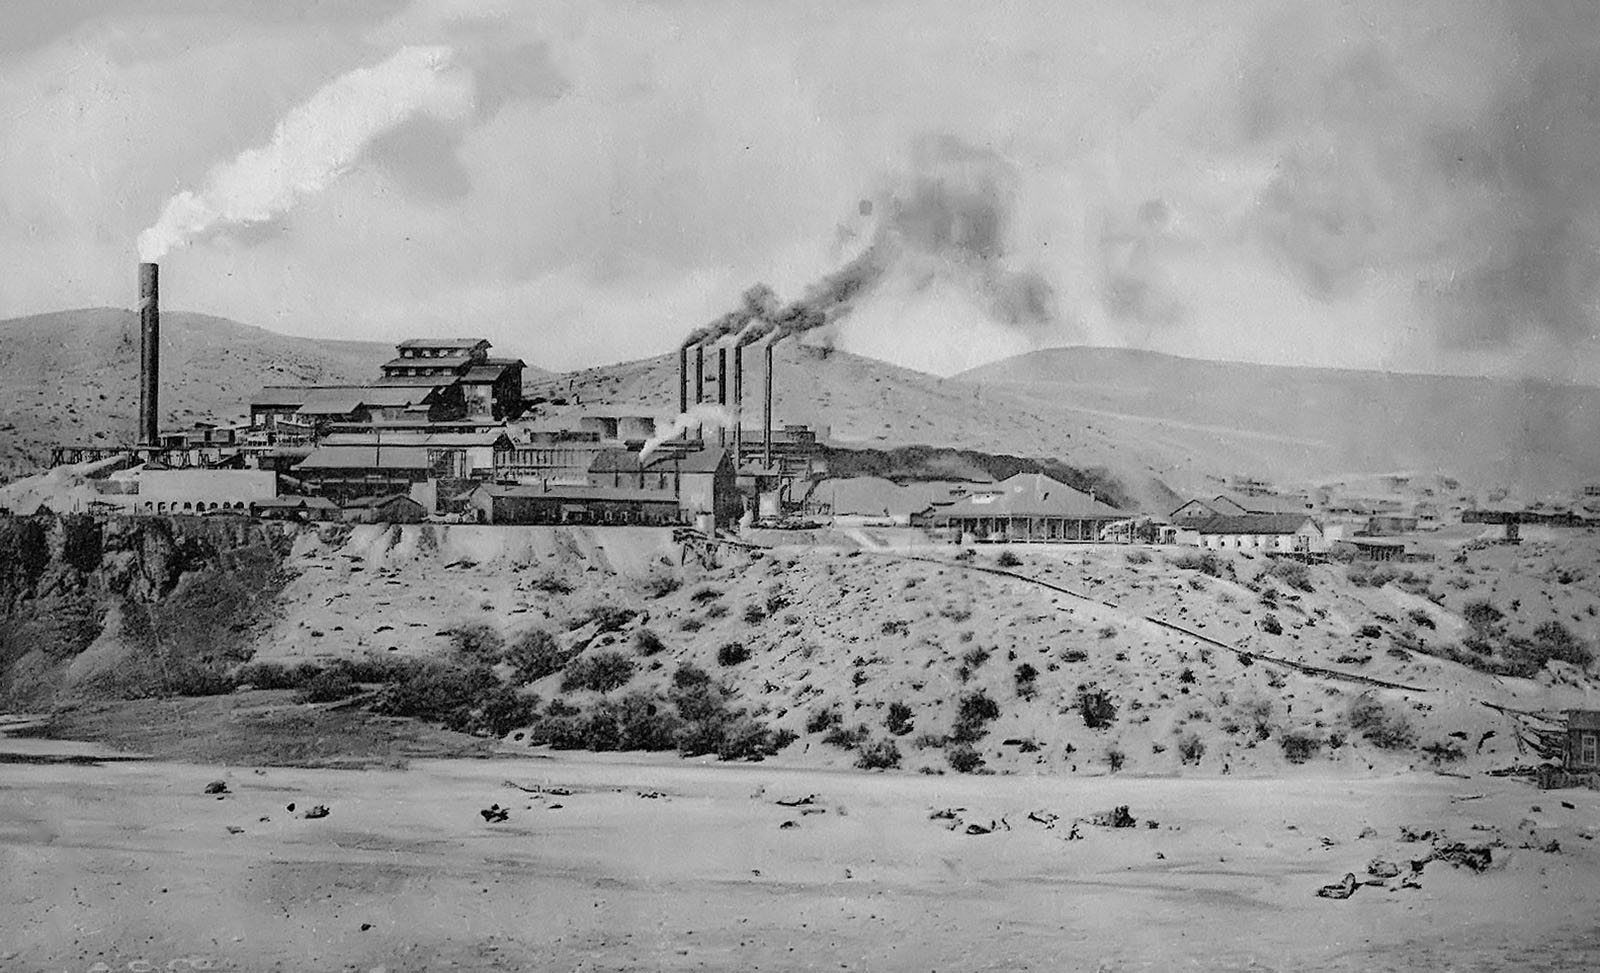 Clifton - Shannon Copper Company Reduction Plant